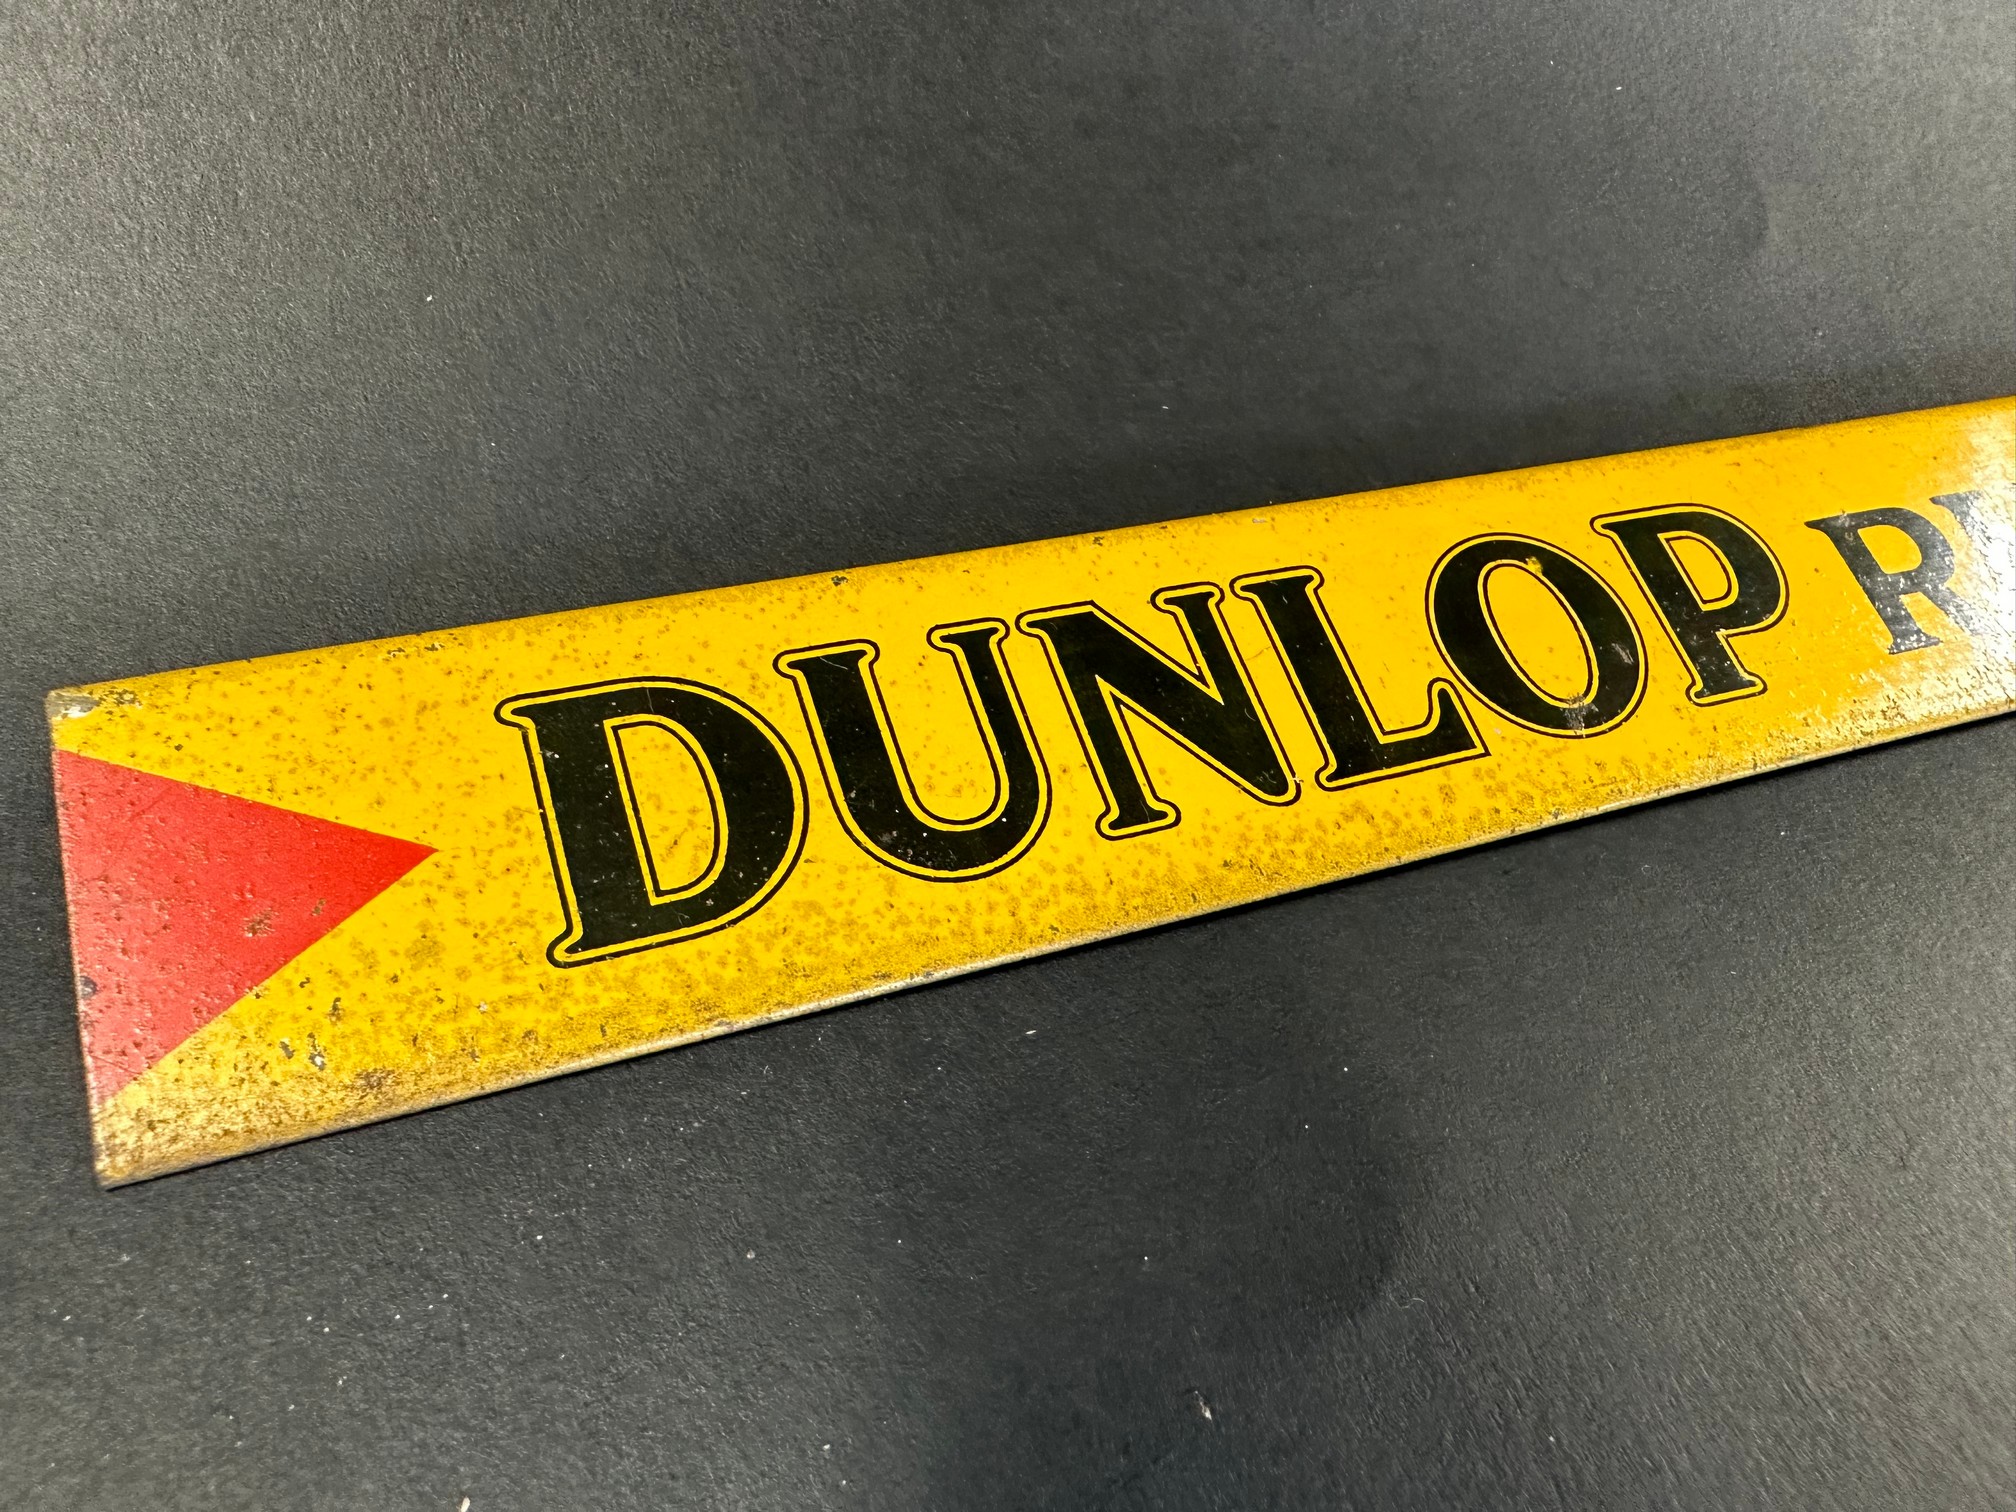 A Dunlop Rubber Solution shelf strip in good condition. - Image 3 of 6